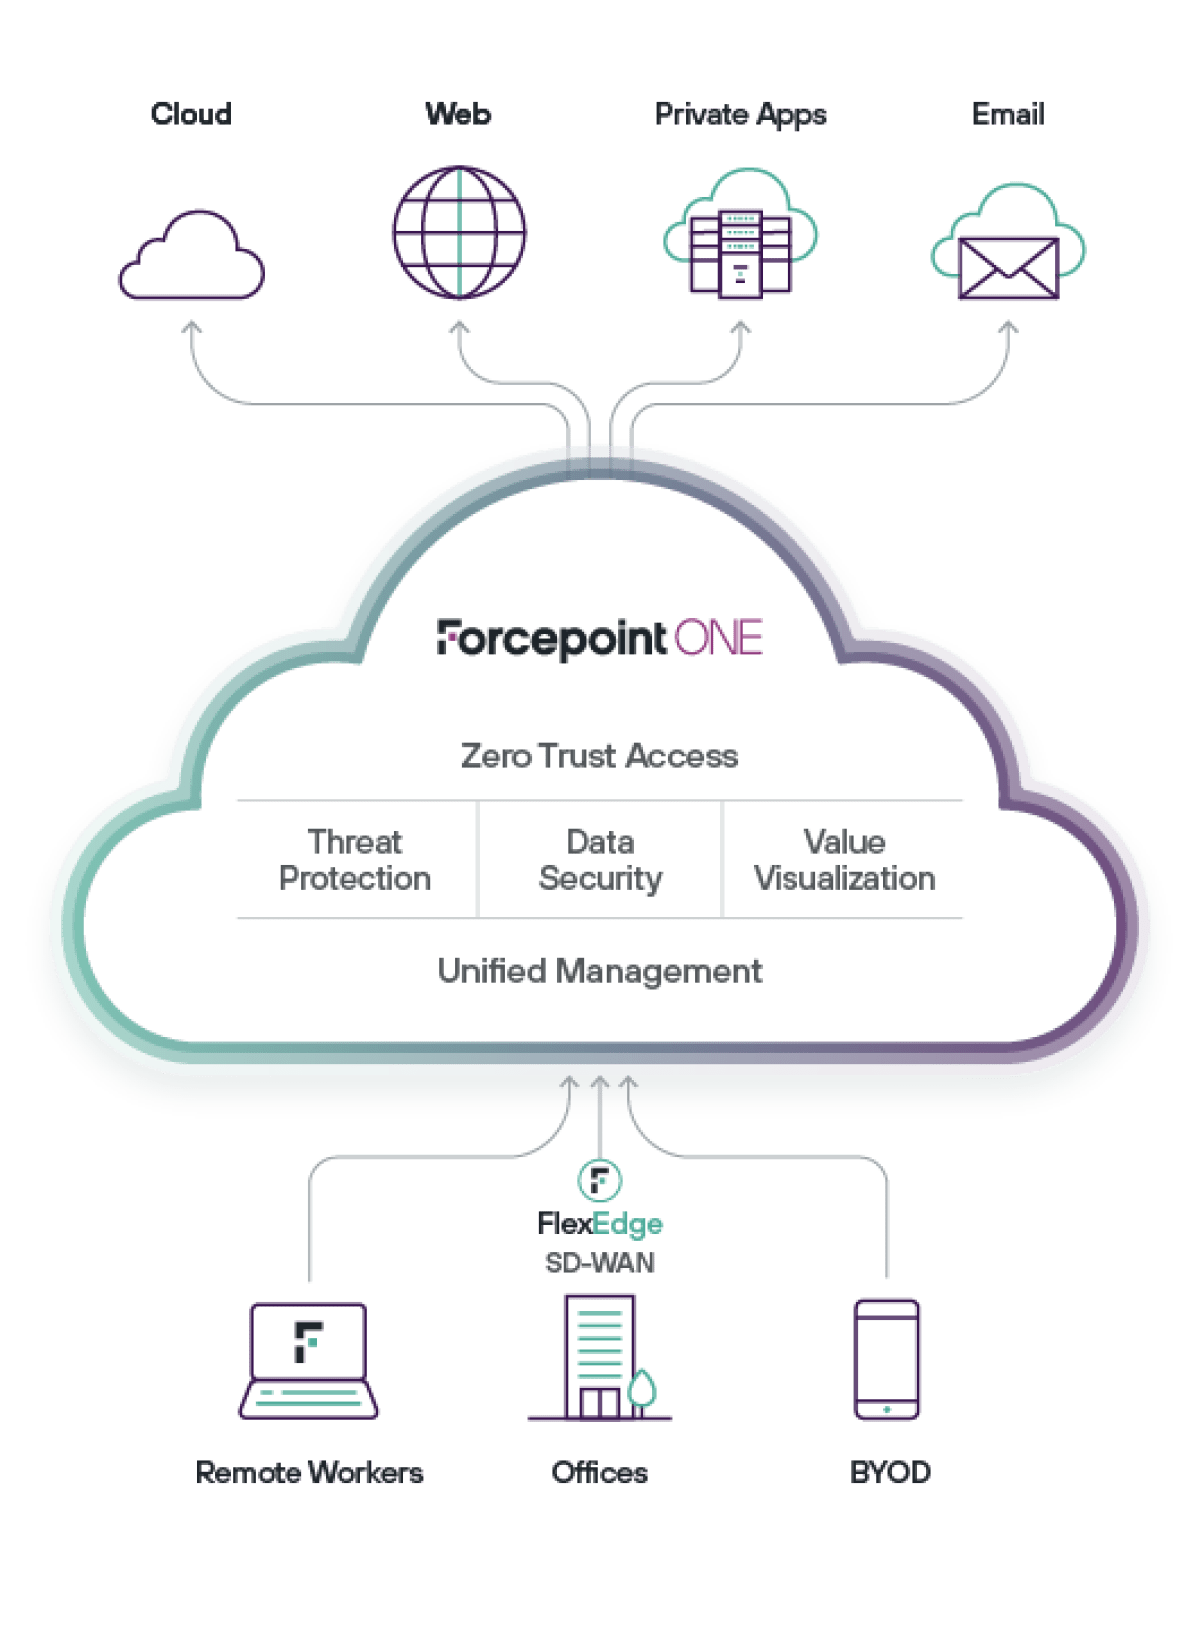 Forcepoint ONE CASB is part of the Forcepoint ONE cloud security platform.